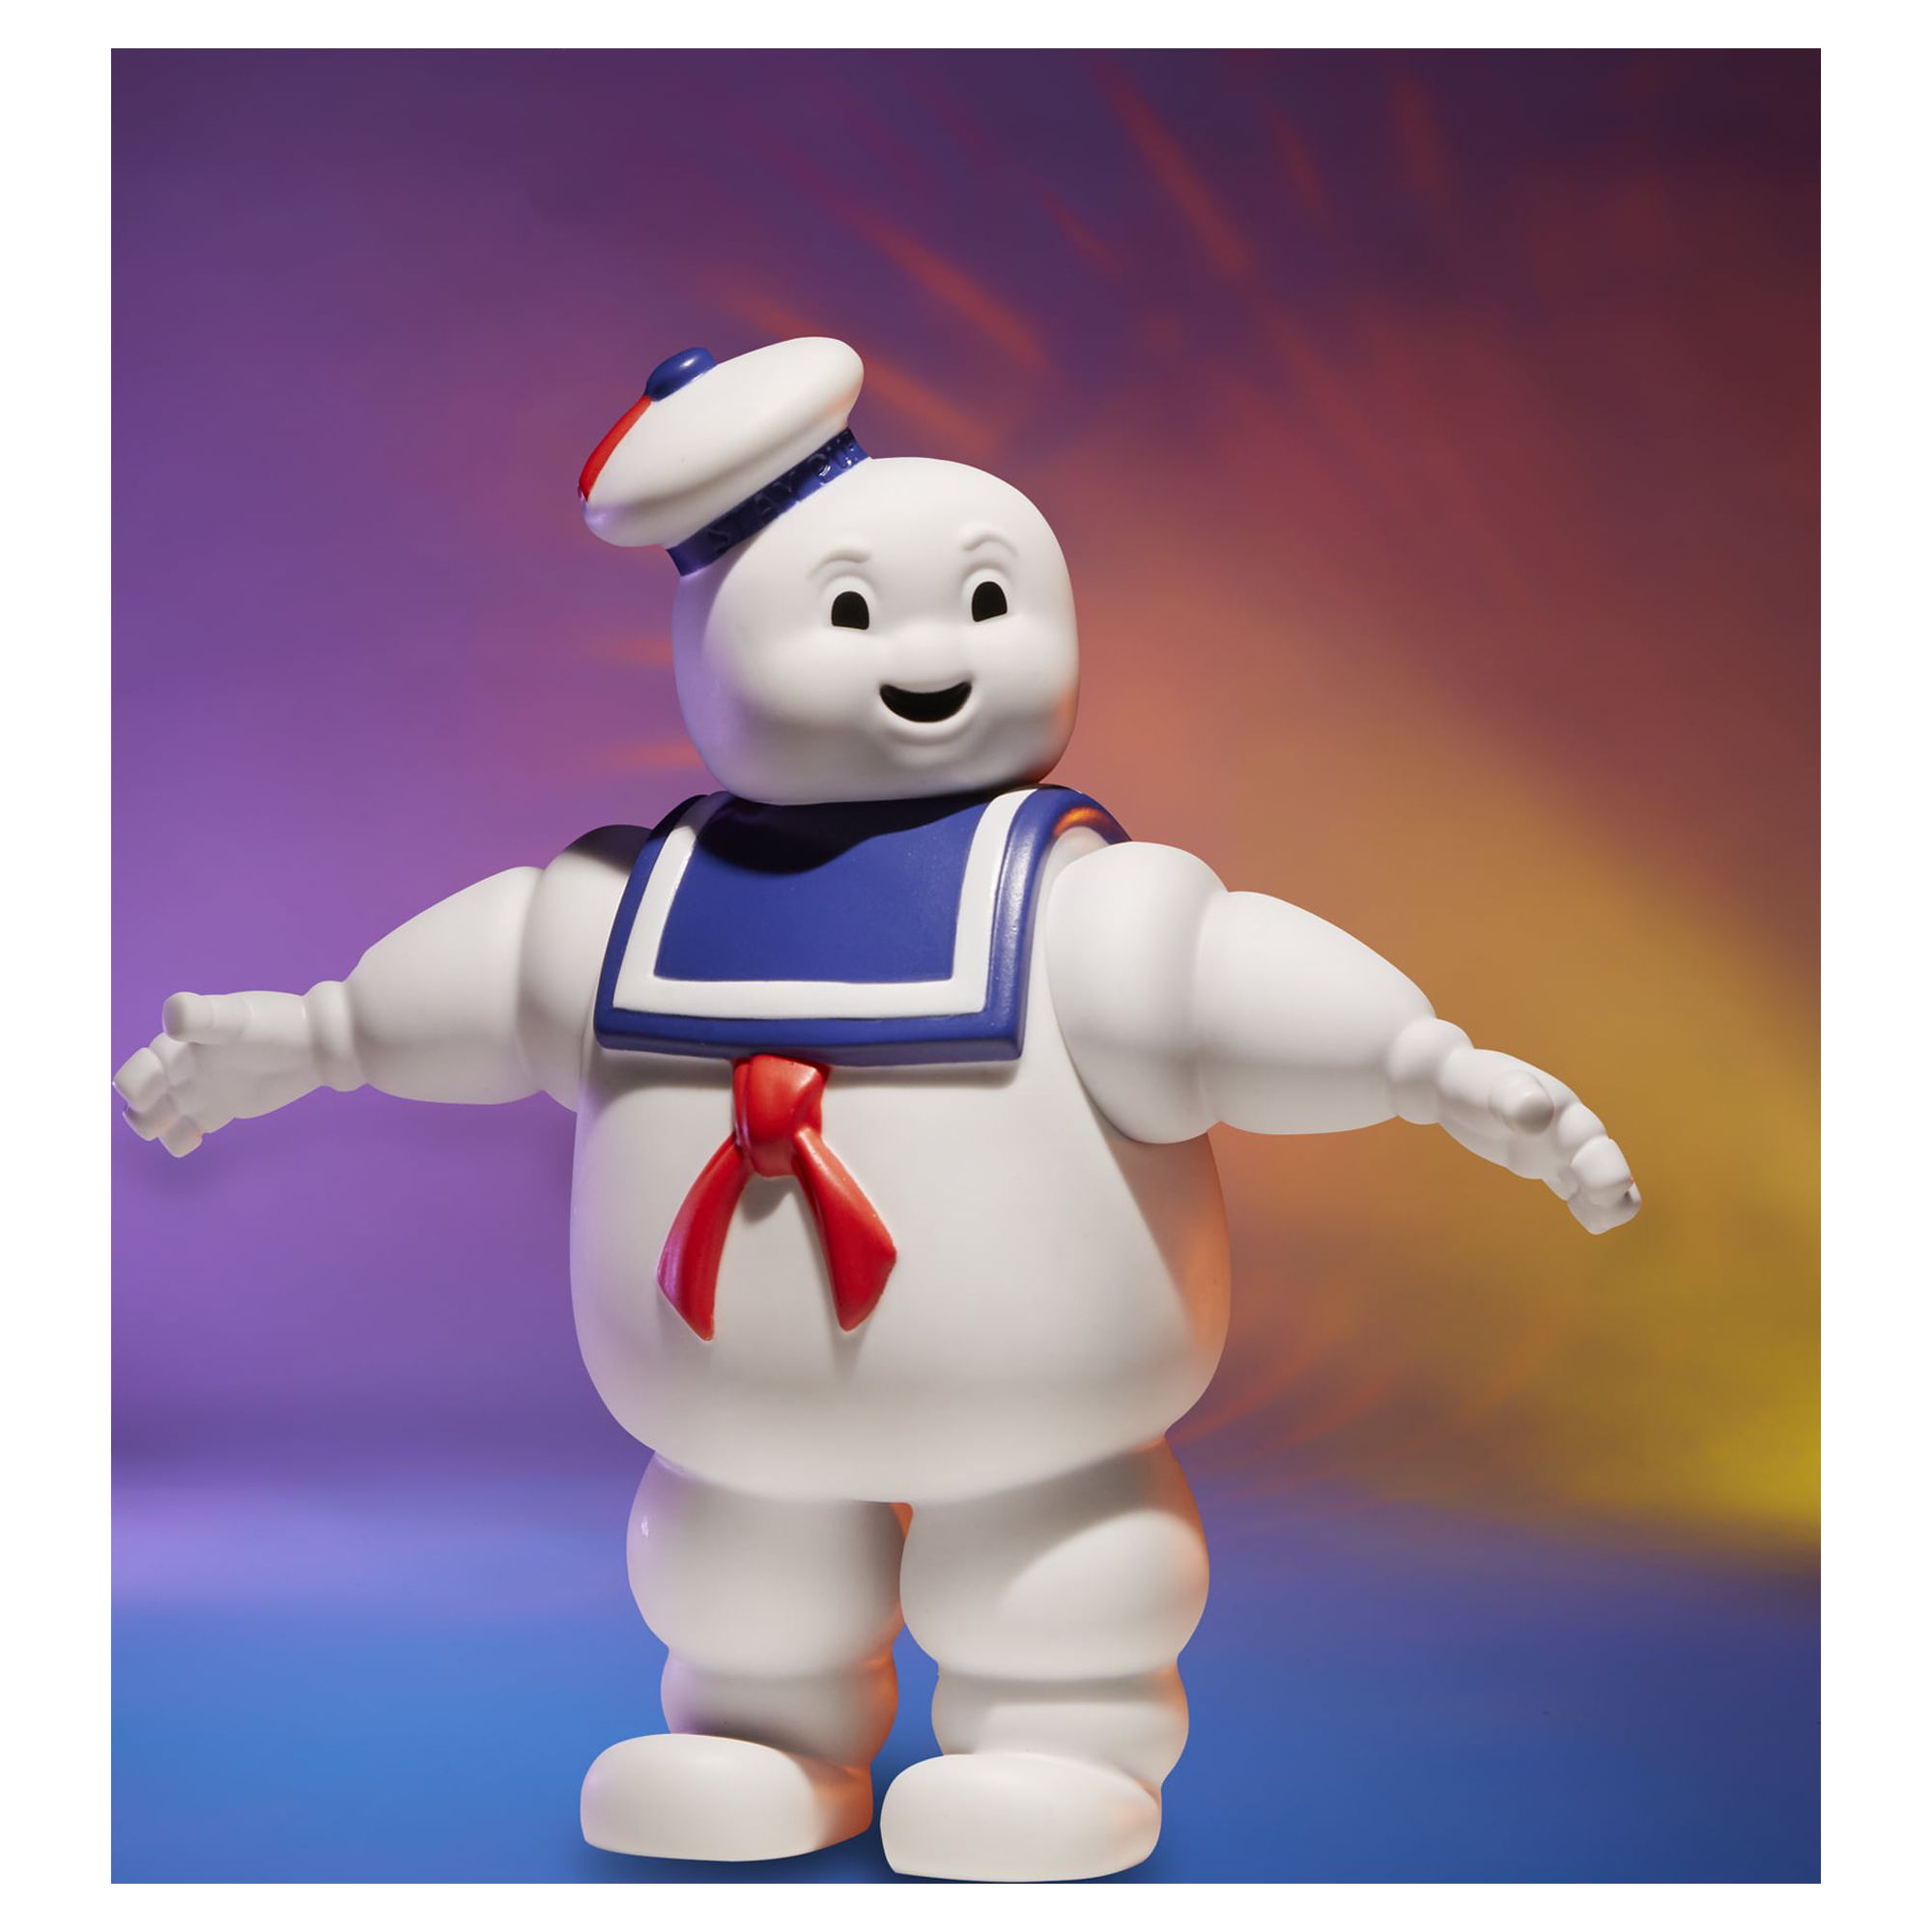 Ghostbusters Kenner Classics Stay-Puft Marshmallow Man - image 2 of 7